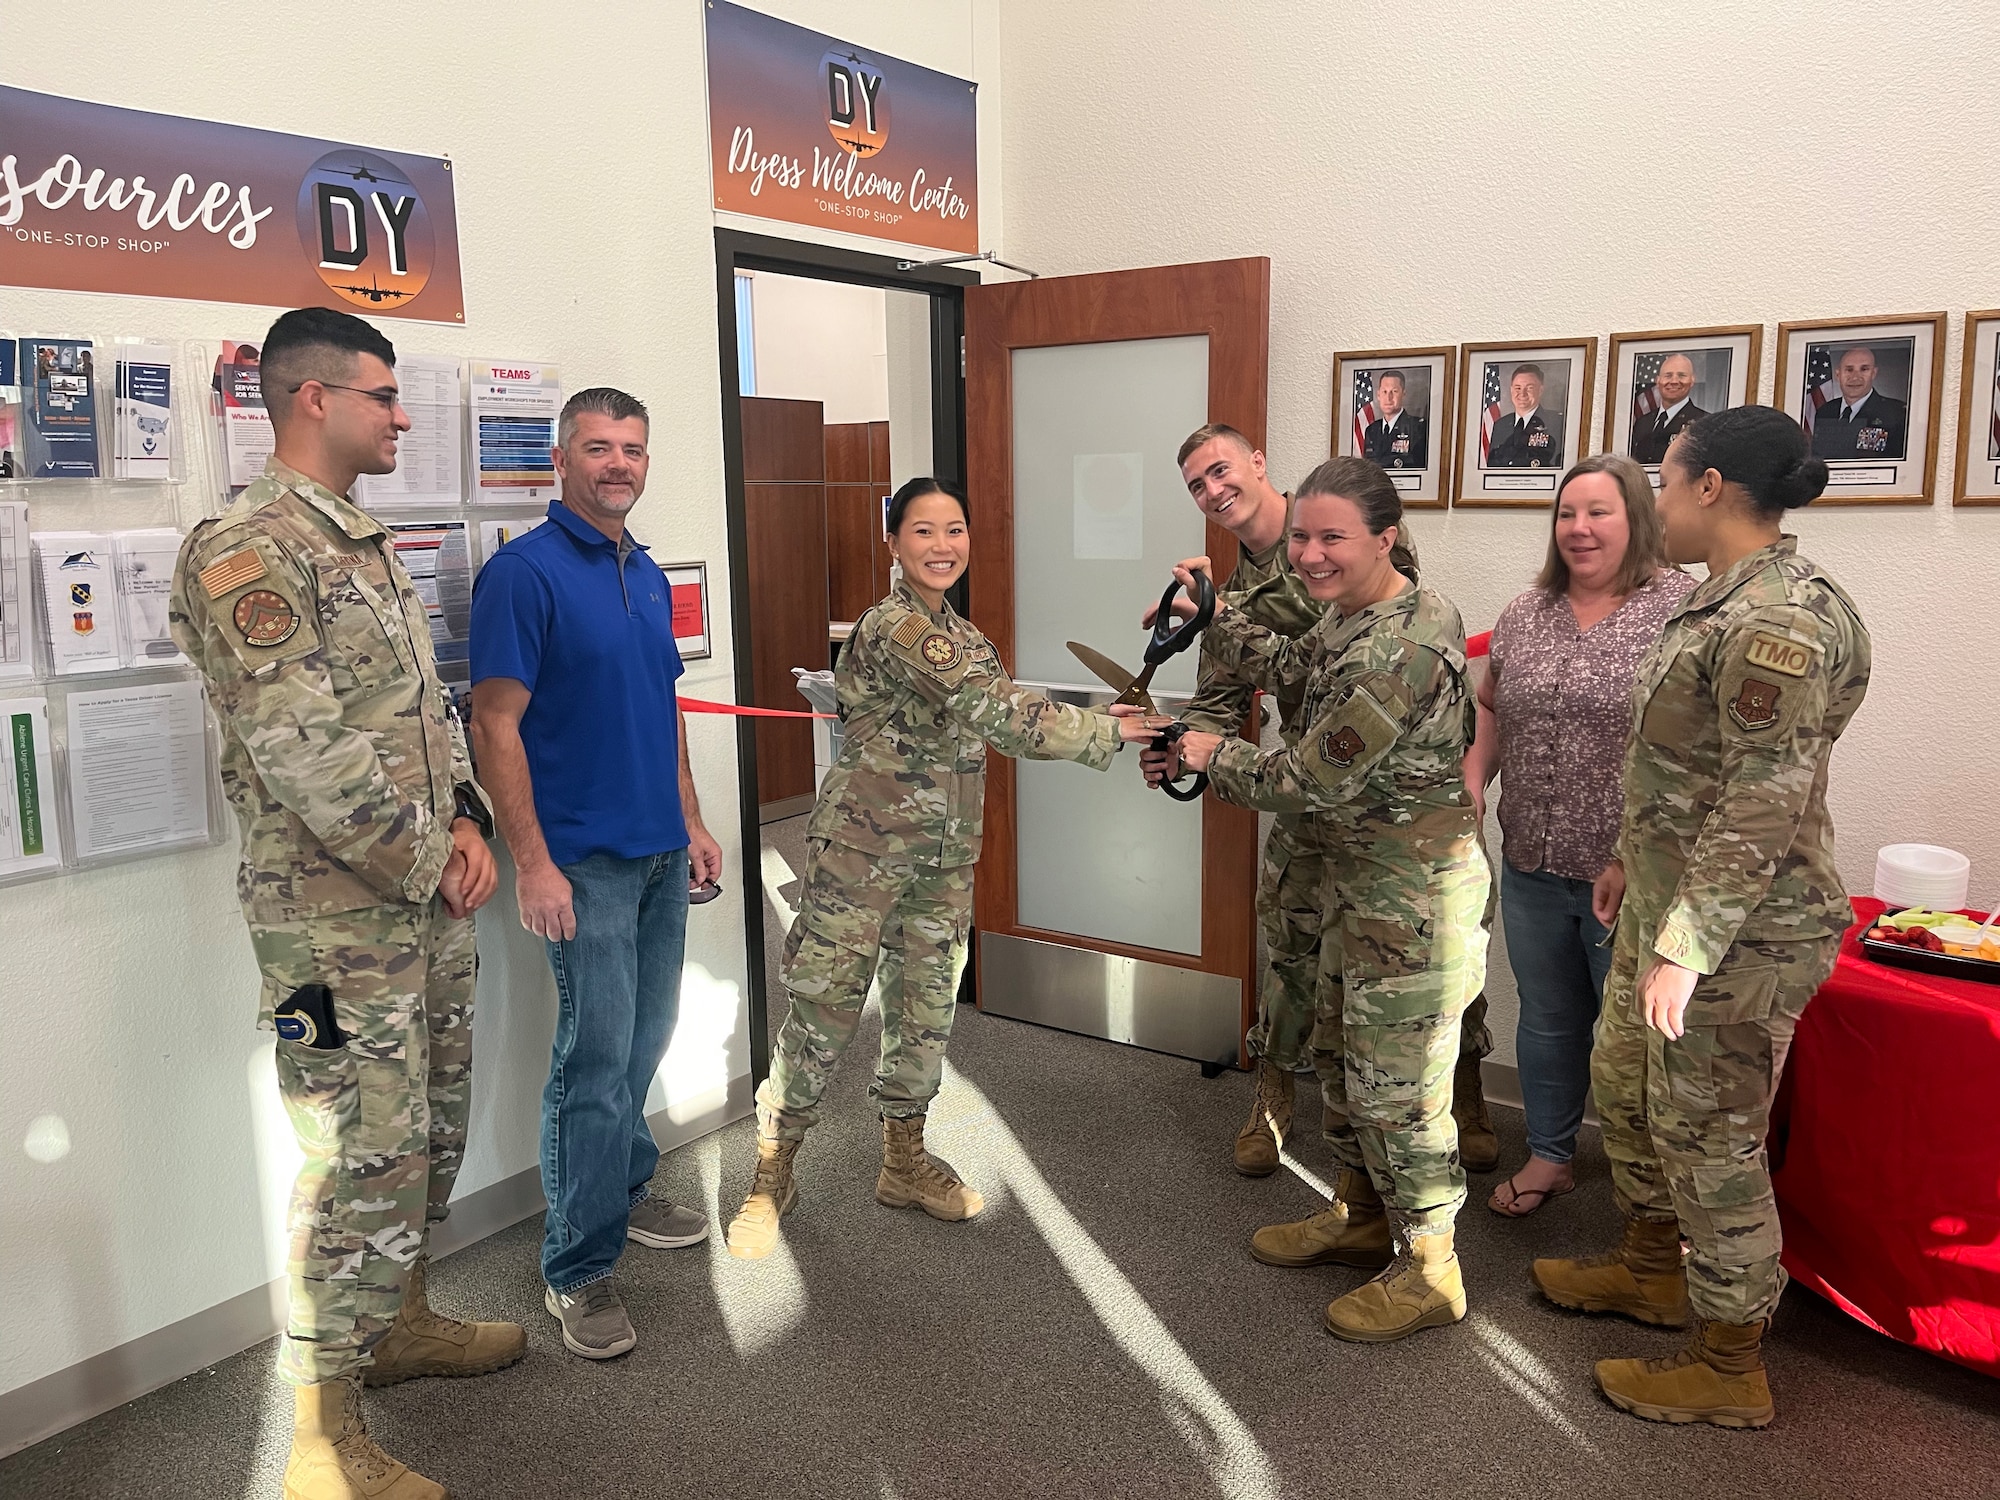 Airmen assigned to the 7th Force Support Squadron cut the ribbon during the grand opening ceremony for the new Dyess Welcome Center at Dyess Air Force Base, Texas, Aug. 29, 2022. The Dyess Welcome Center is located at BLDG 7402 and will be open Monday, Tuesday, and Thursday from 8 a.m.- 4 p.m. or by appointment scheduled by unit support staff. (U.S. Air Force photo by Tech. Sgt. David Scott-Gaughan)